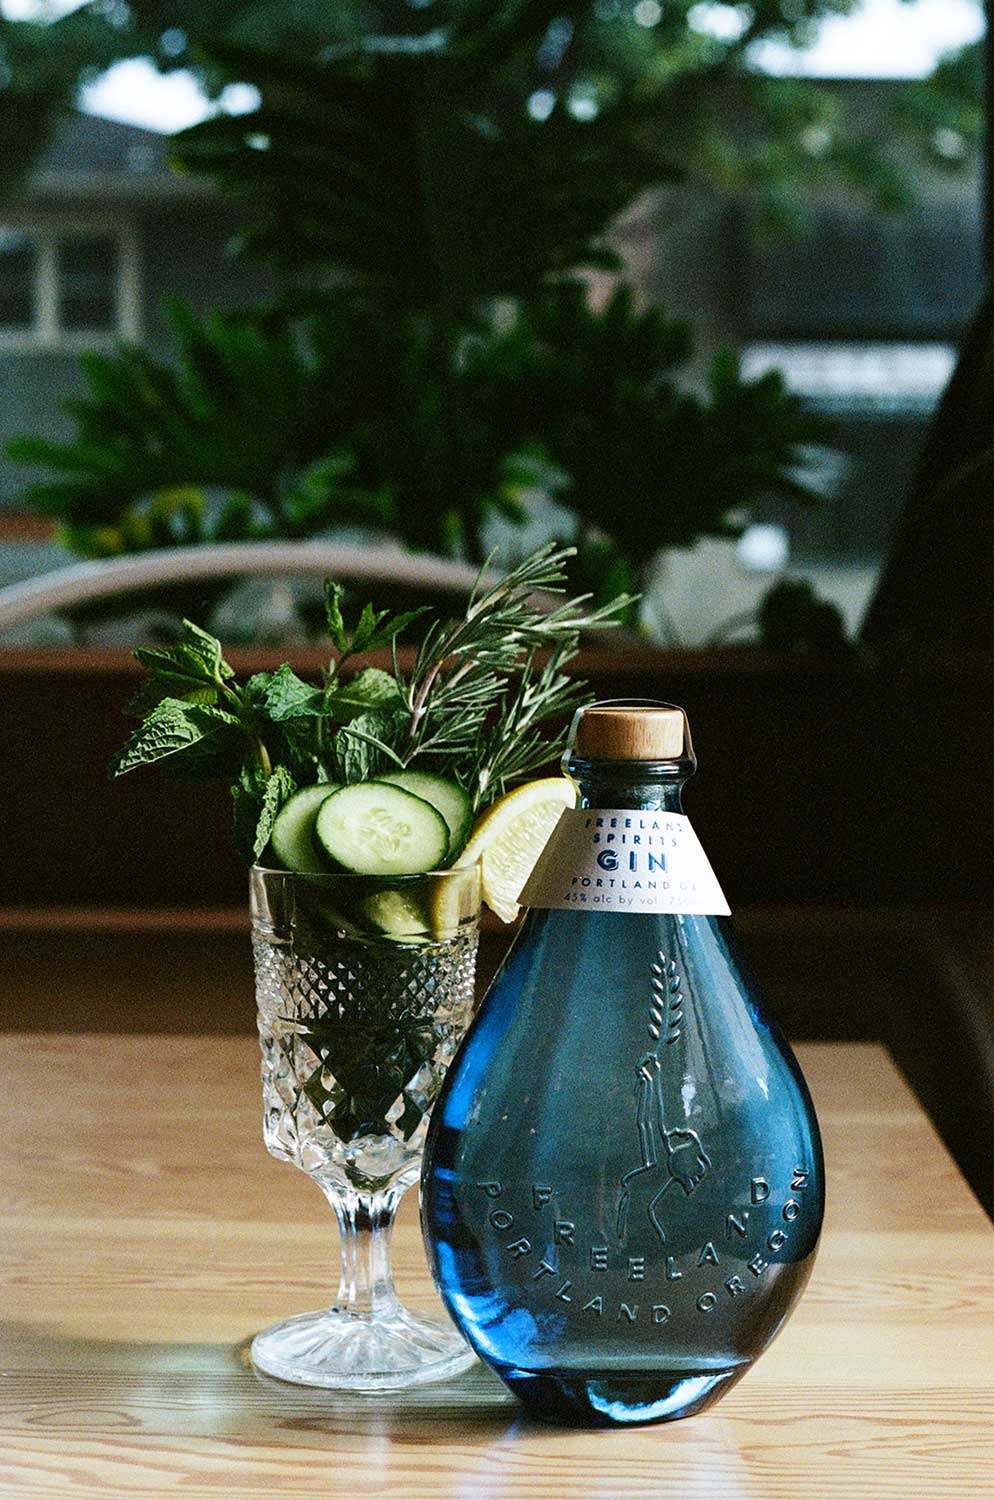 An elegant cup filled with herbs, cucumbers, and sliced lemons next to a blue bottle of gin